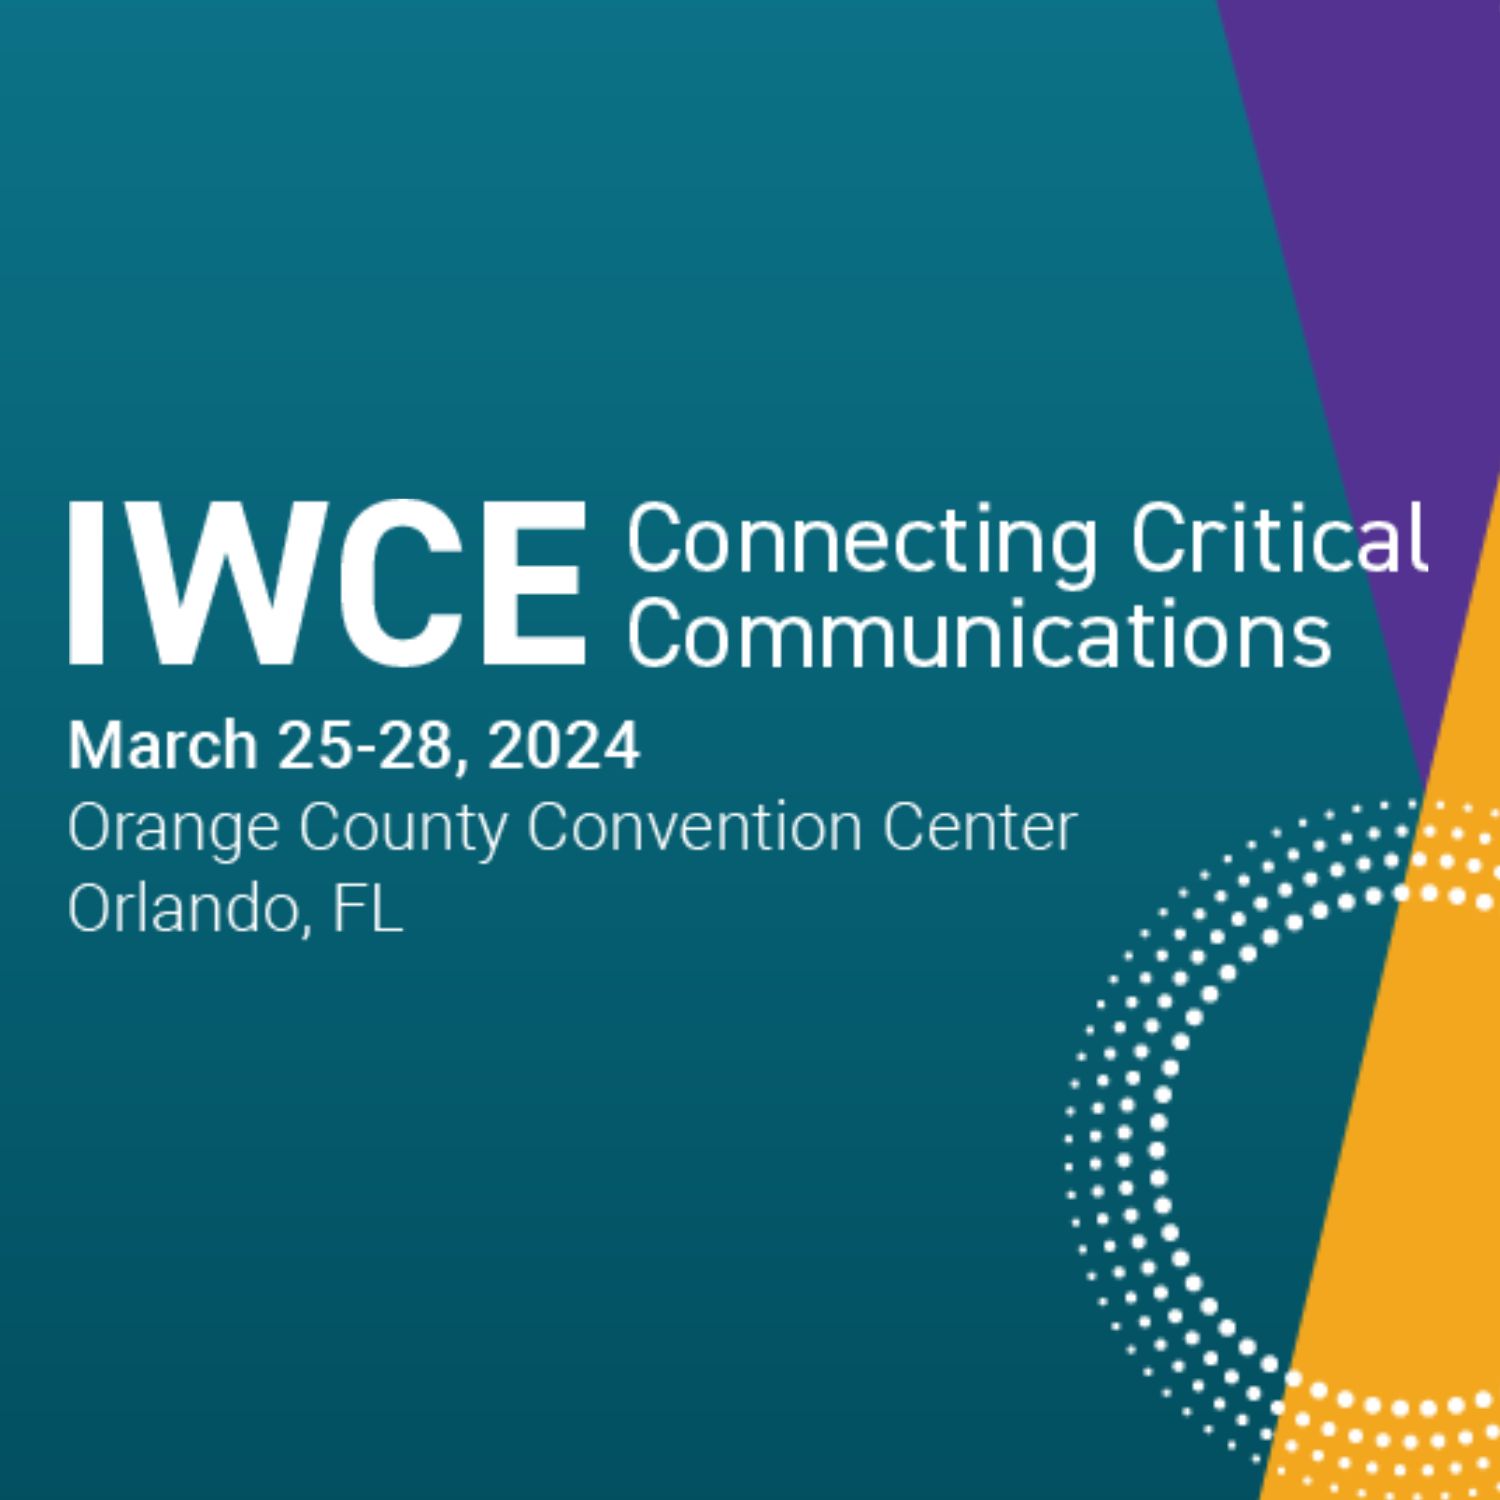 BTI Wireless showcased at IWCE 2024 with digital fiber DAS for Mission Critical Communications